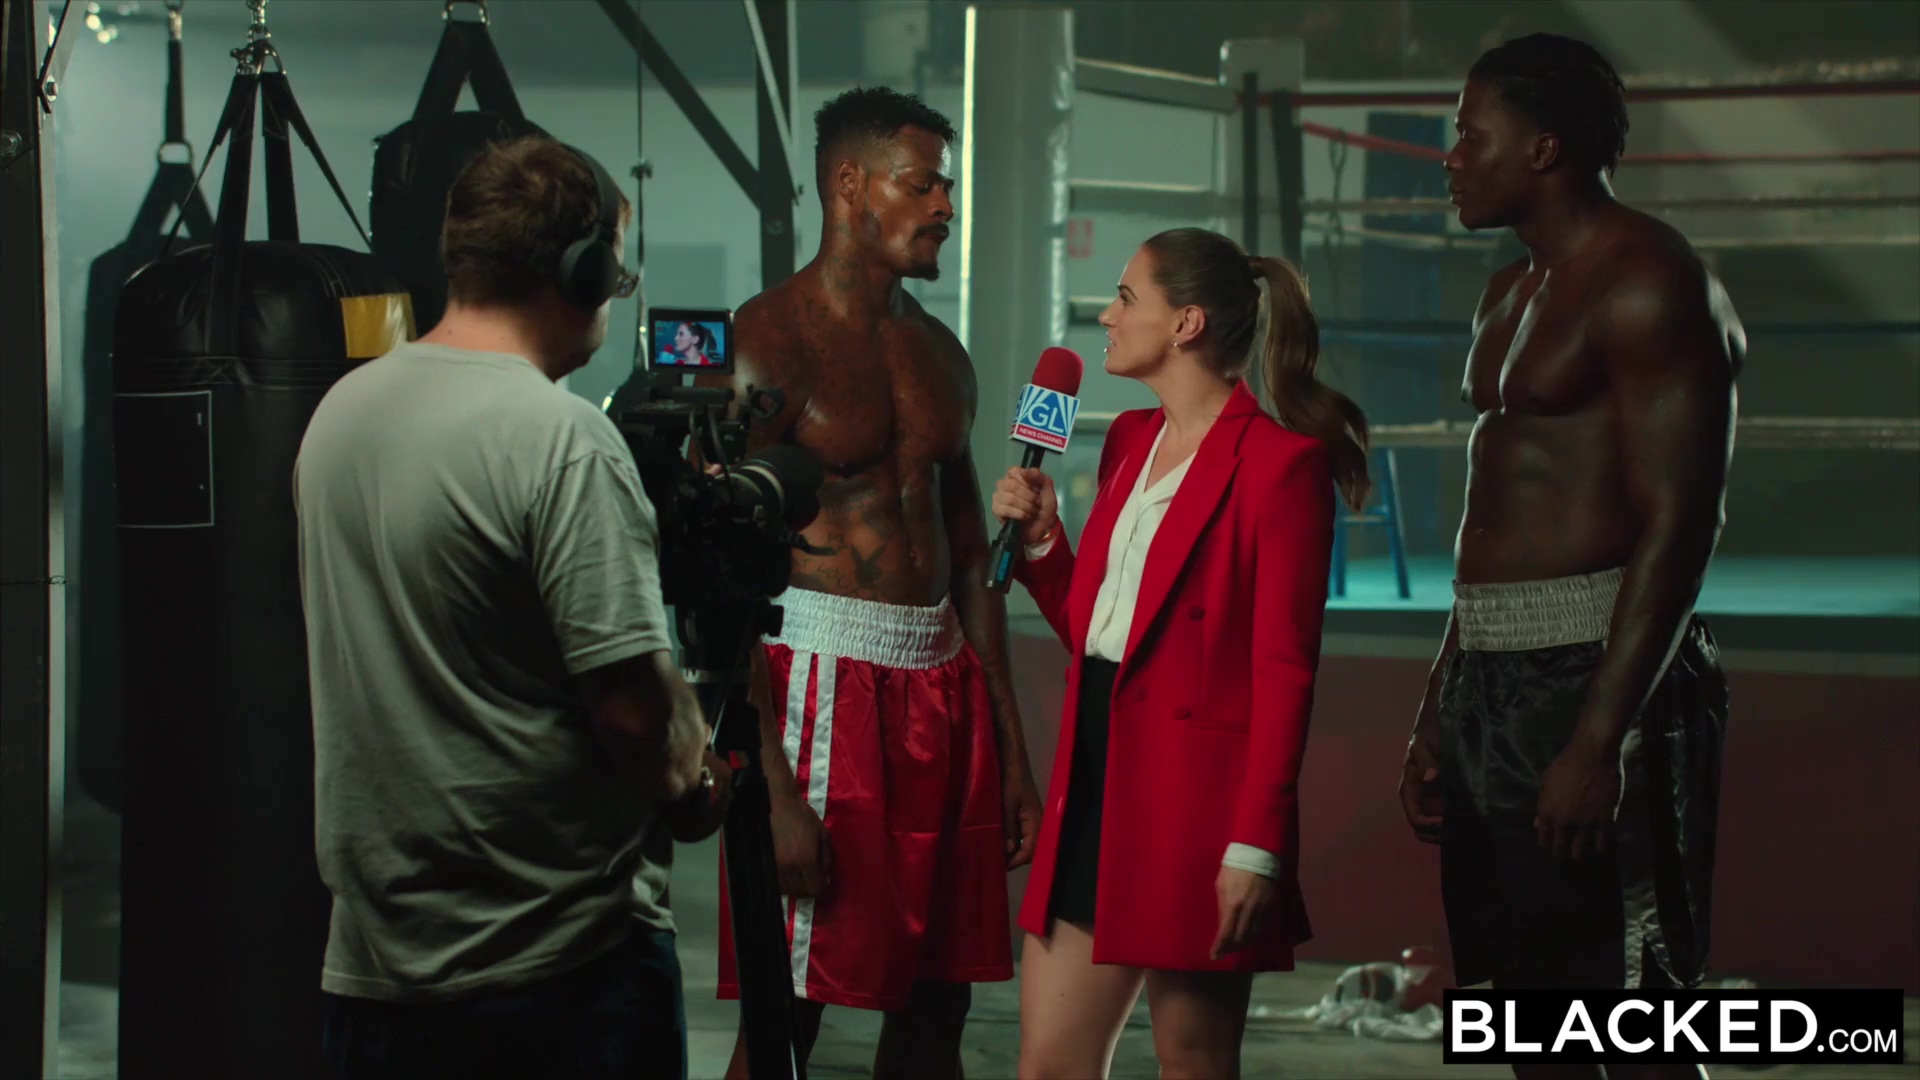 Shemale Boxing Club - Tori Black Is BLACKED by Heavy Weight BBC Champions